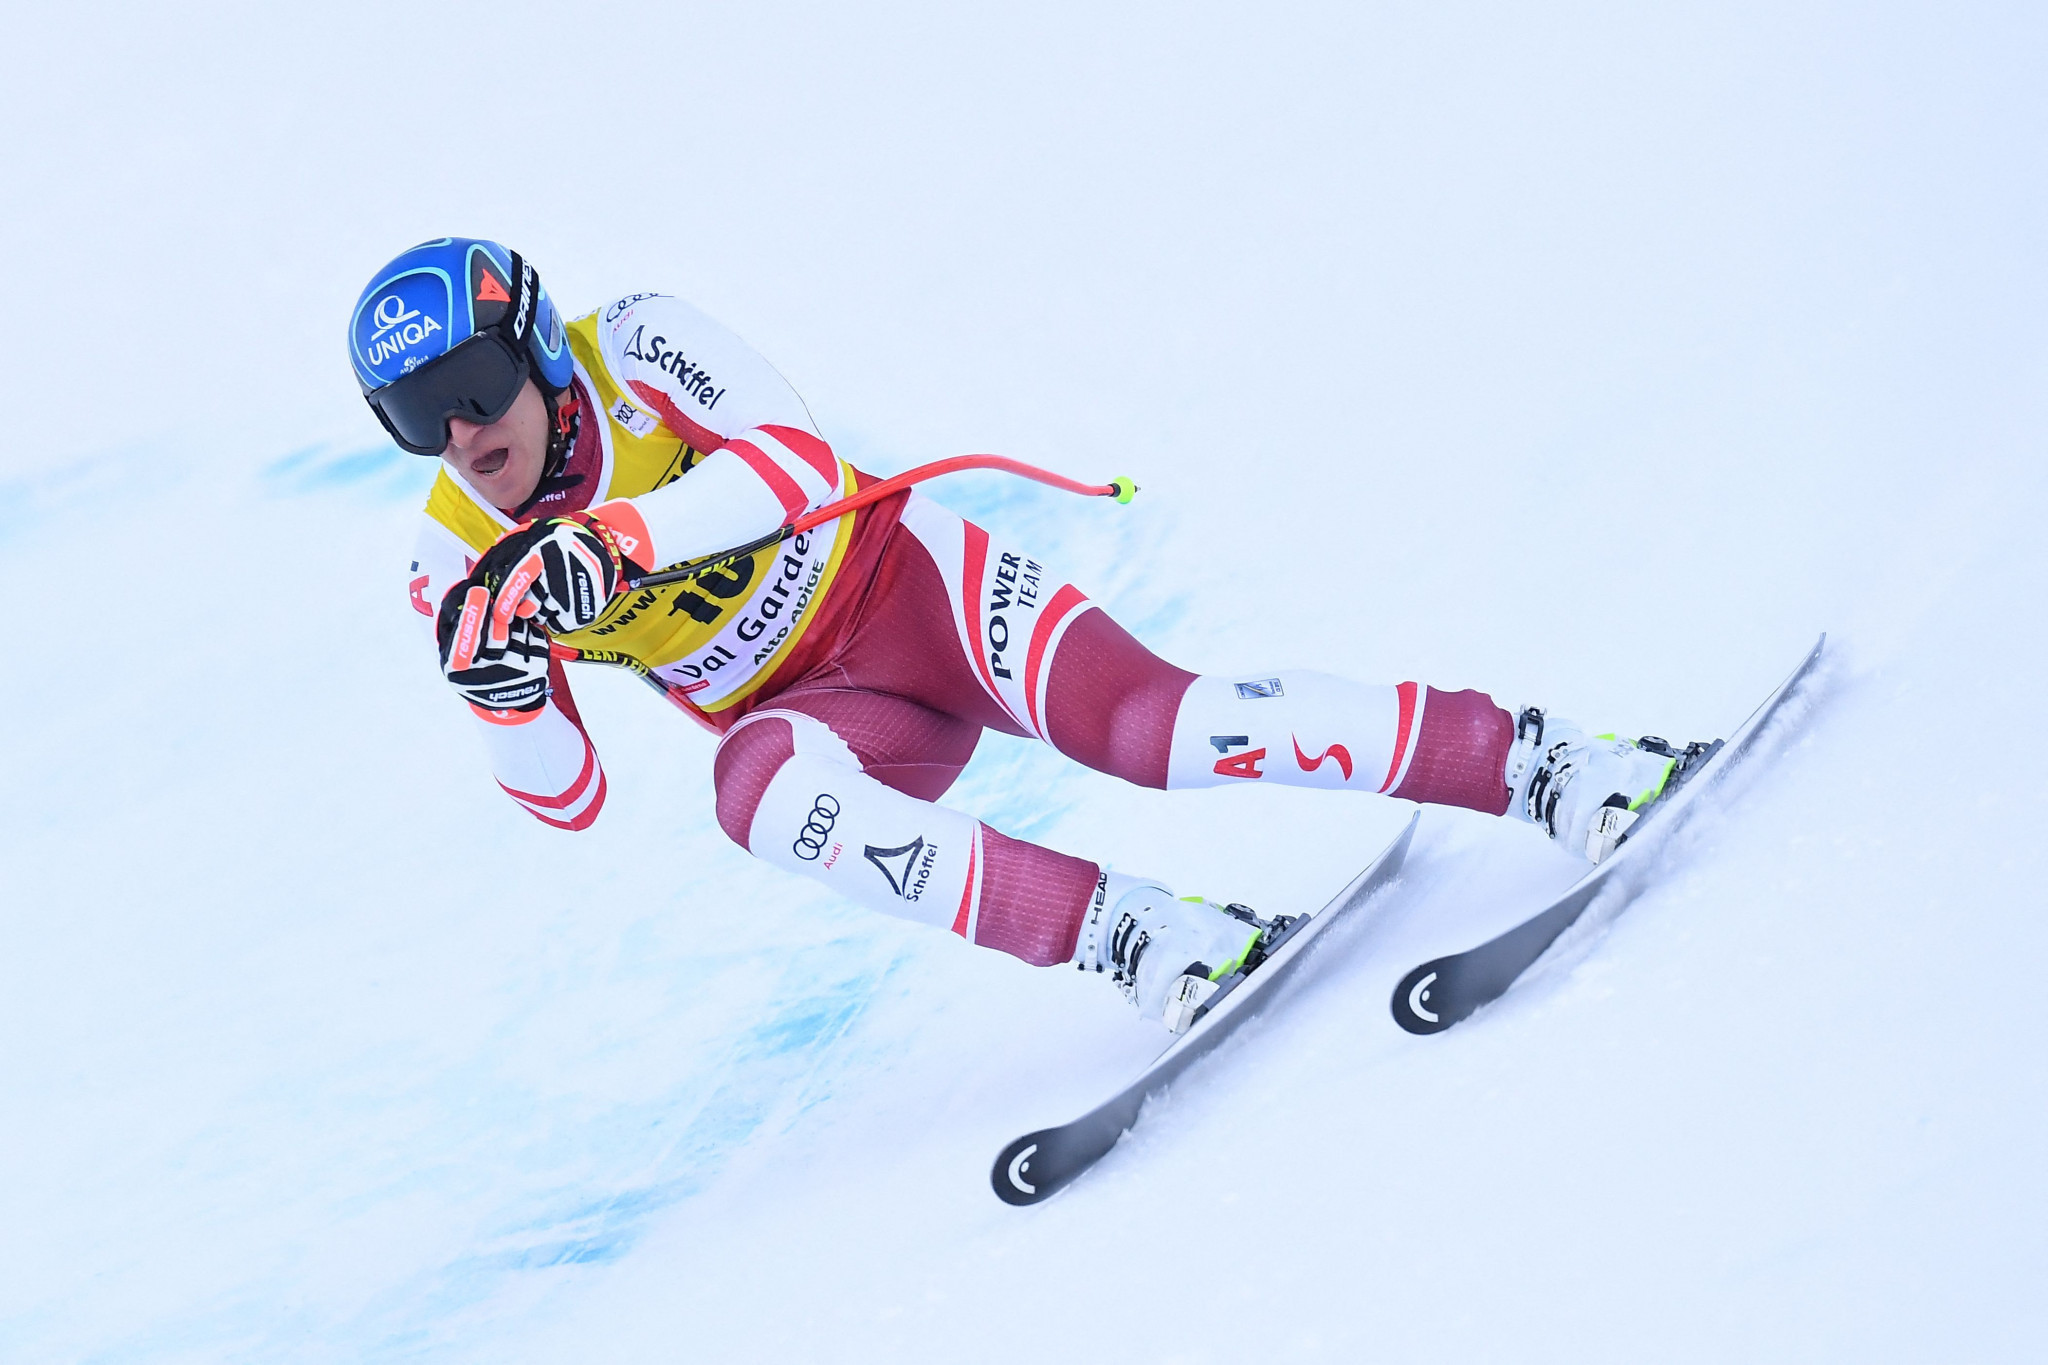 Odermatt carries healthy overall lead into Alpine Ski World Cup speed races in Bormio